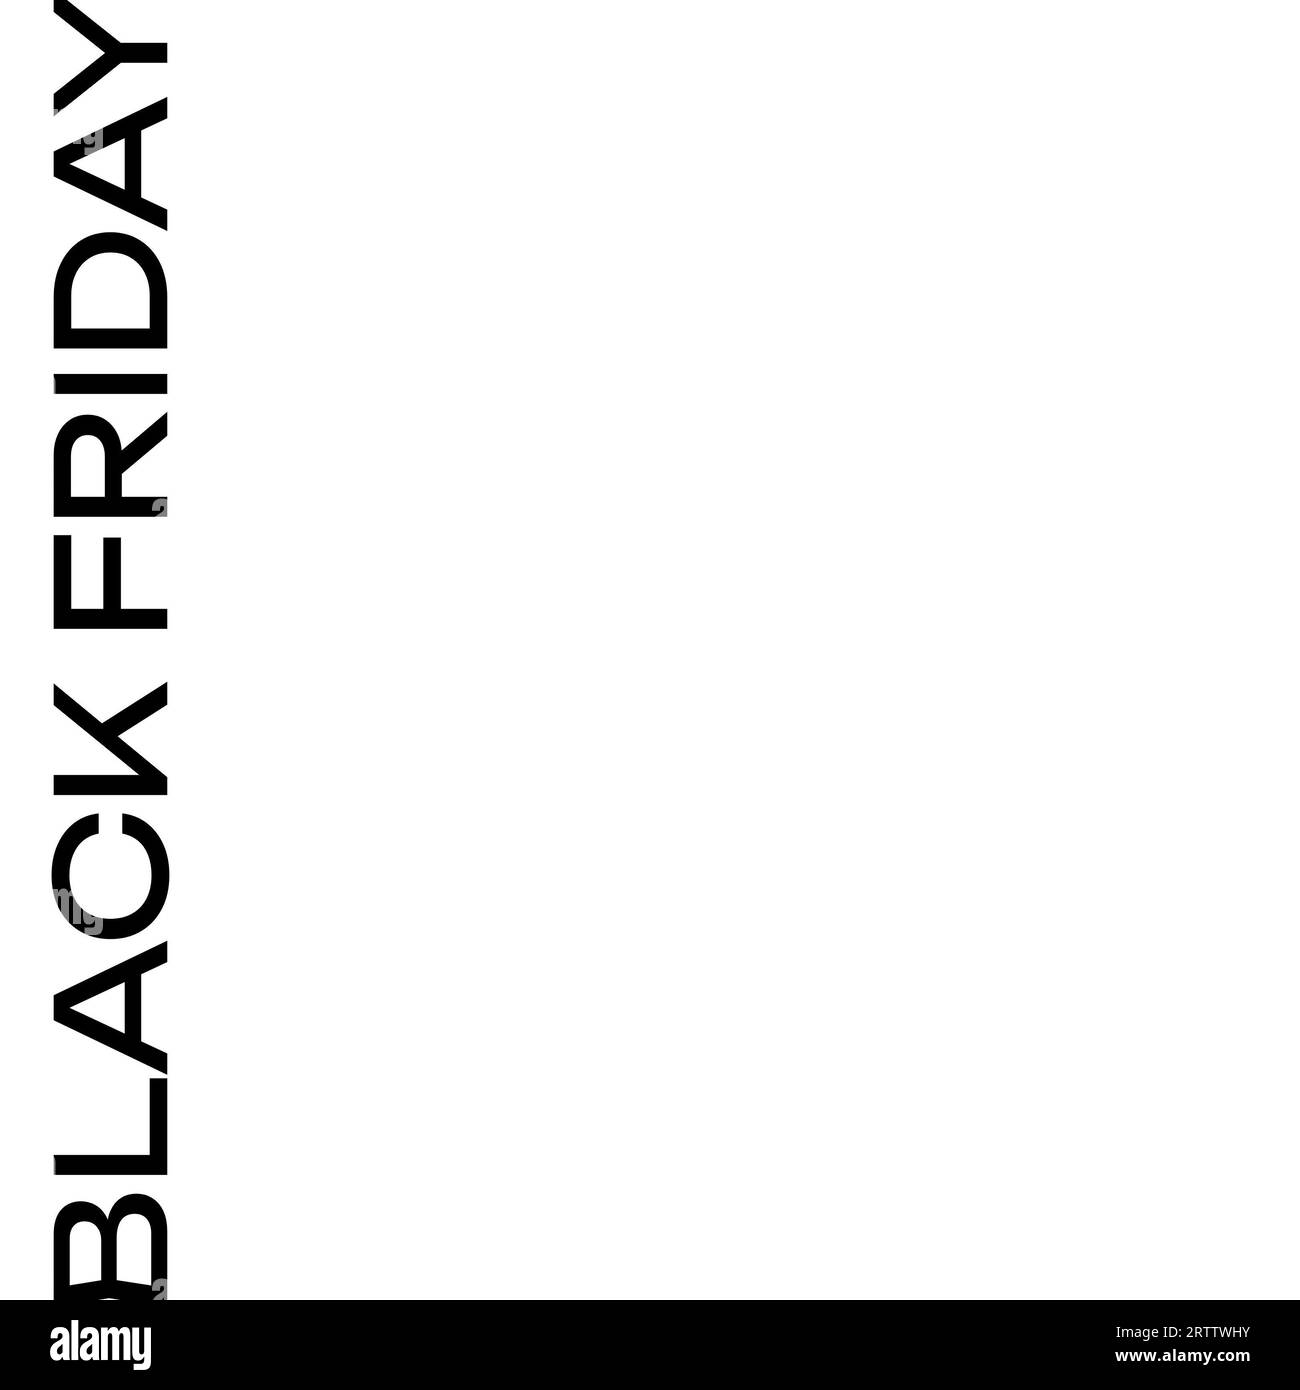 Black friday text in black on white background Stock Photo